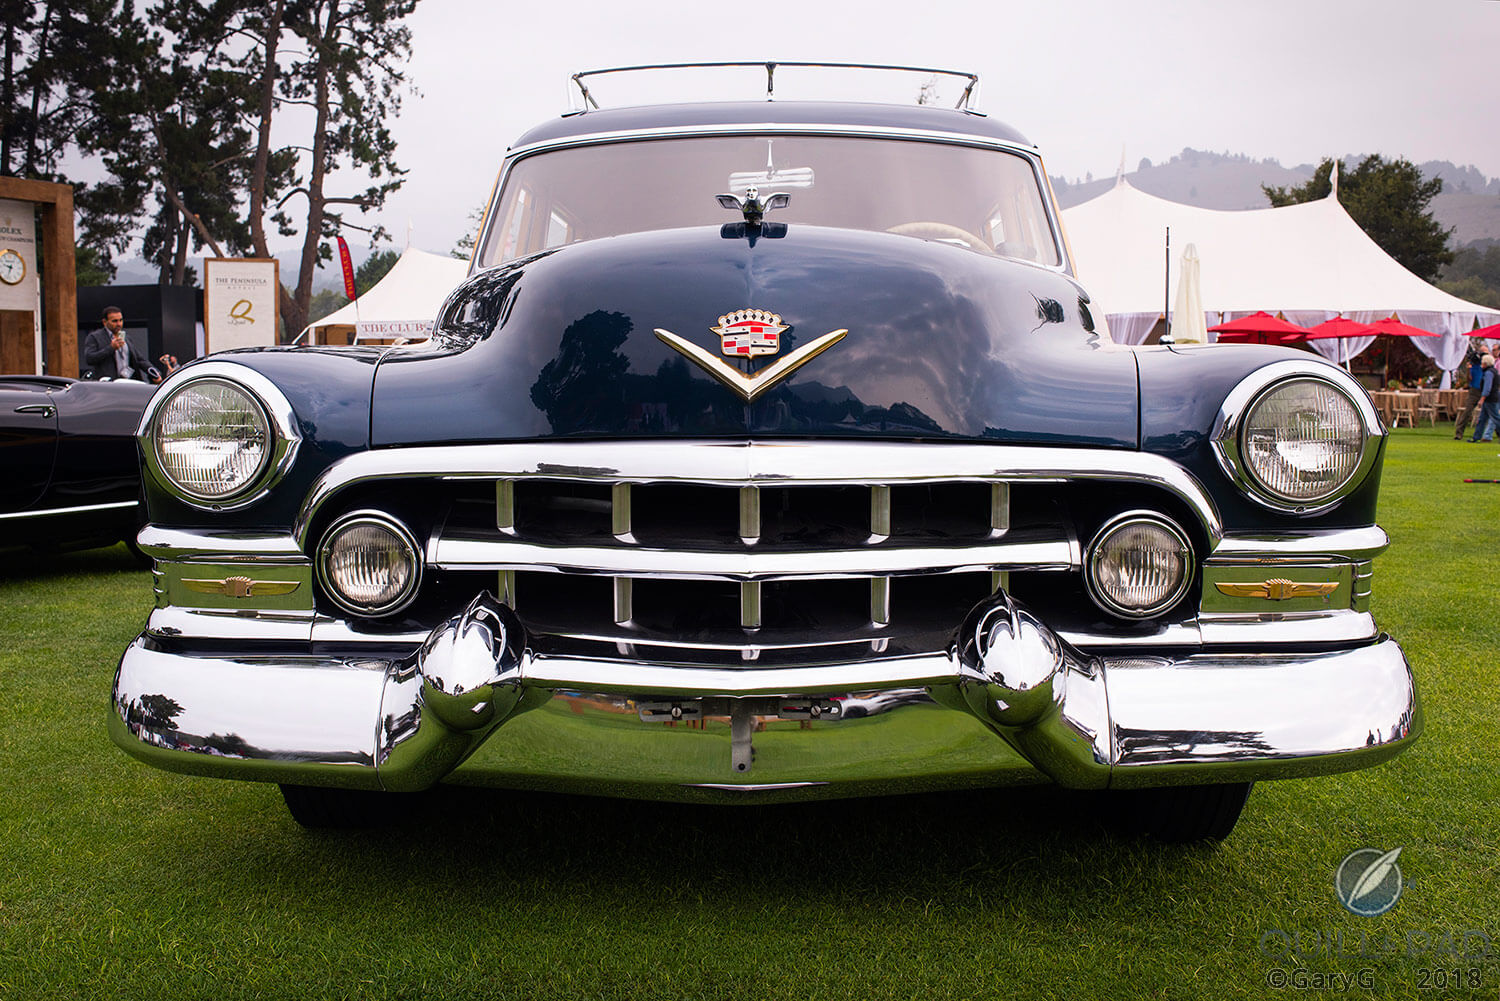 The mighty: 1951 Cadillac 75 Series Limousine at The Quail, 2018